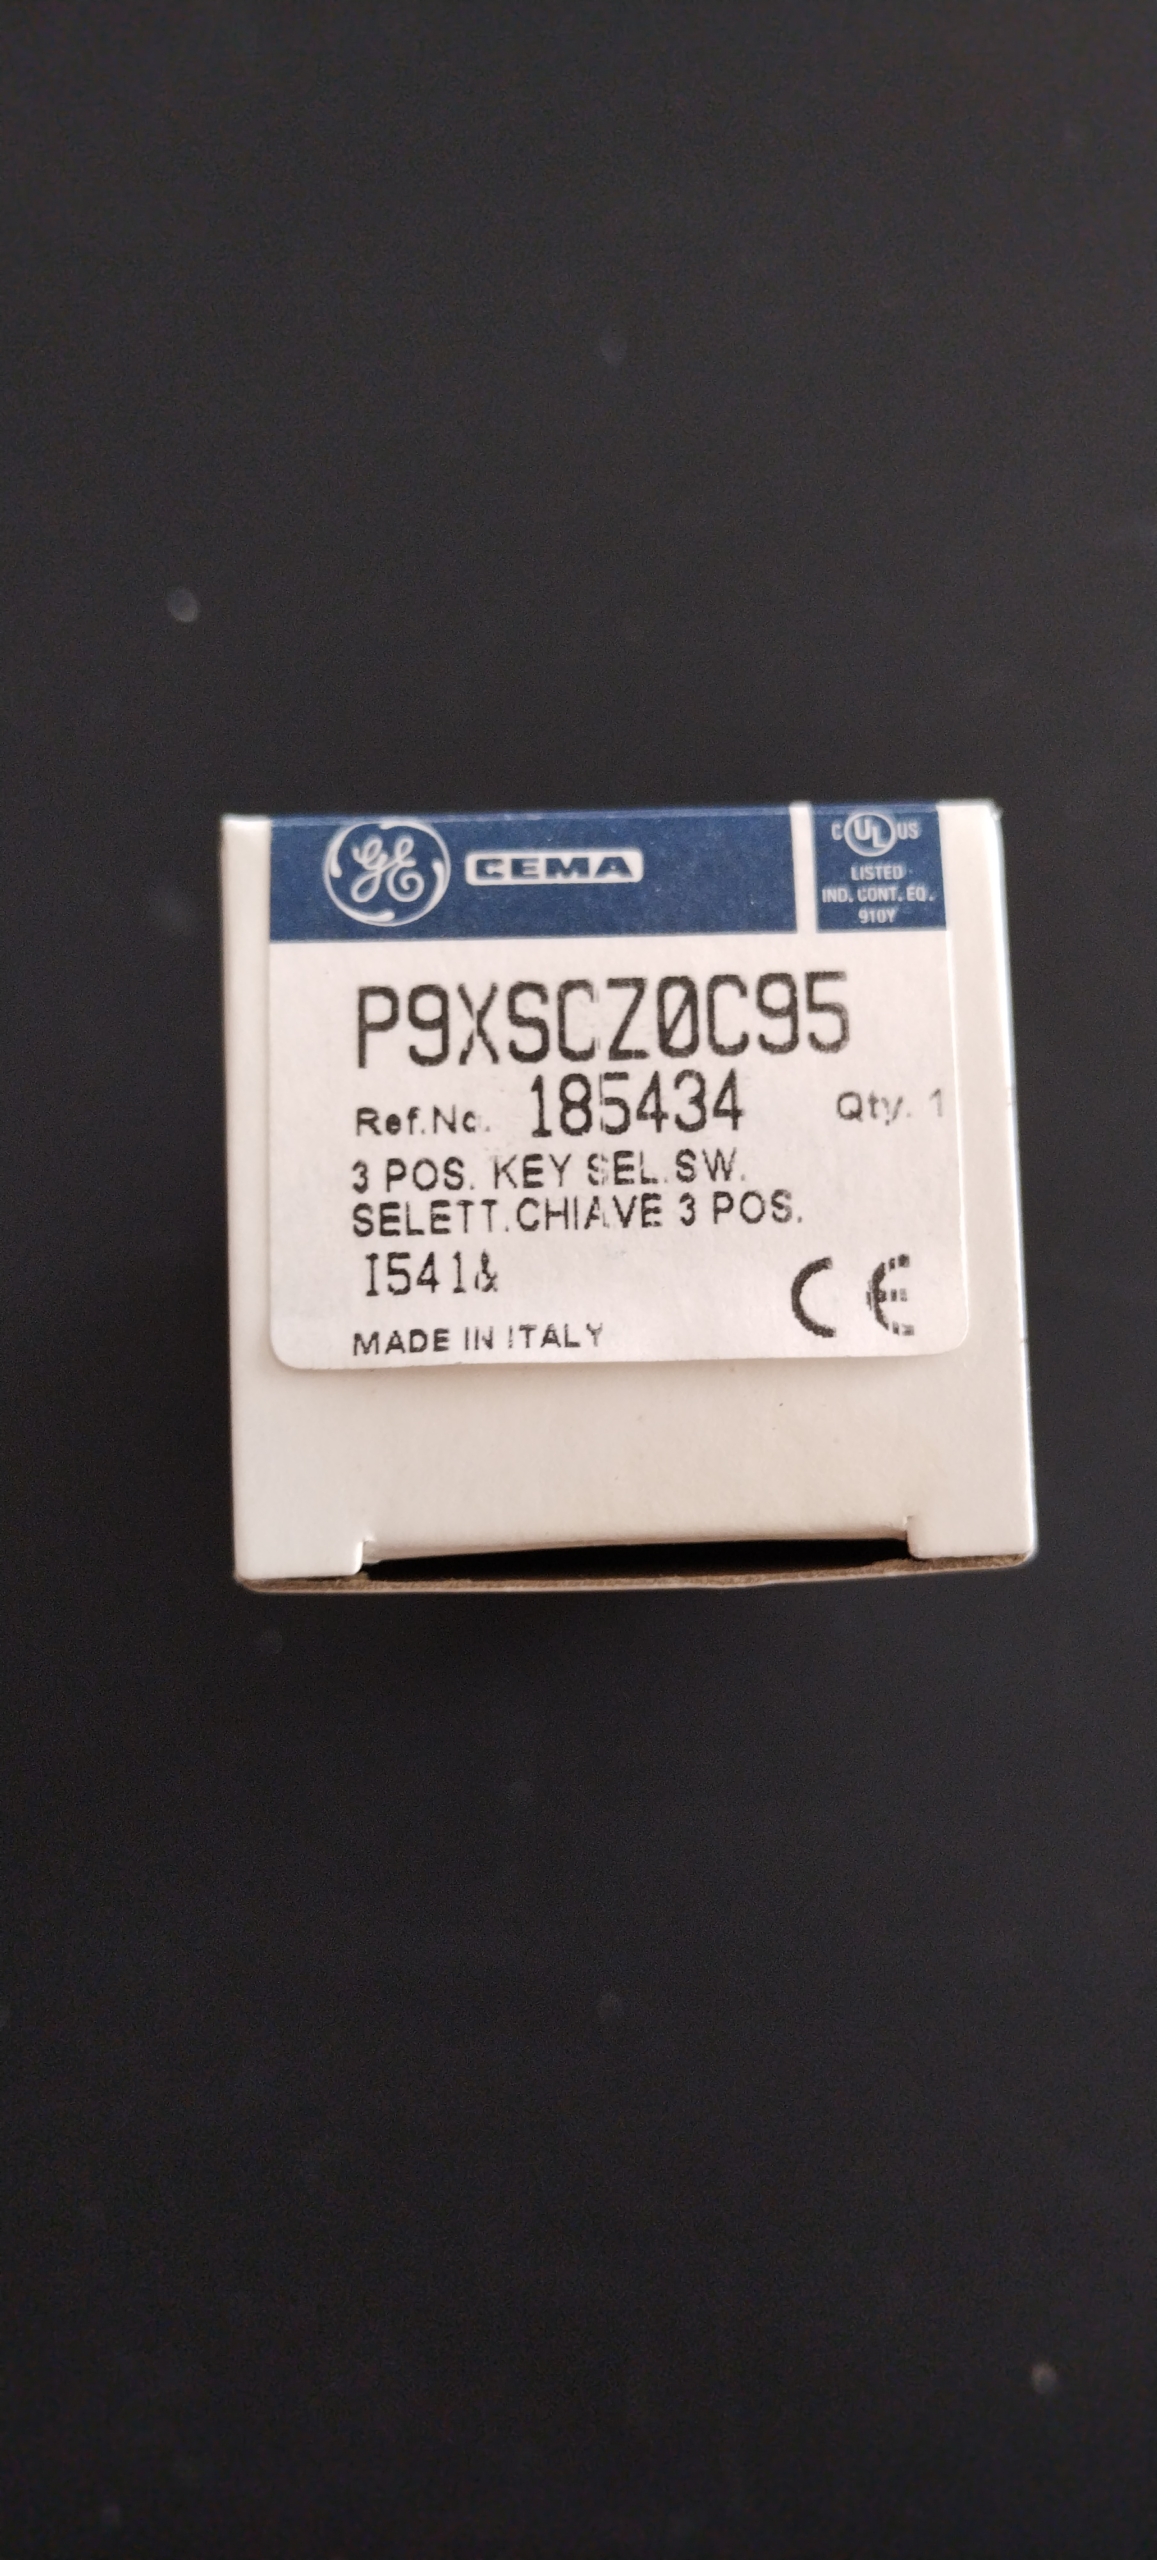 185434 GE P9XSCZ0C95 3 Position Key Selector Switch FREE DHL EXPRESS  SHIPPING